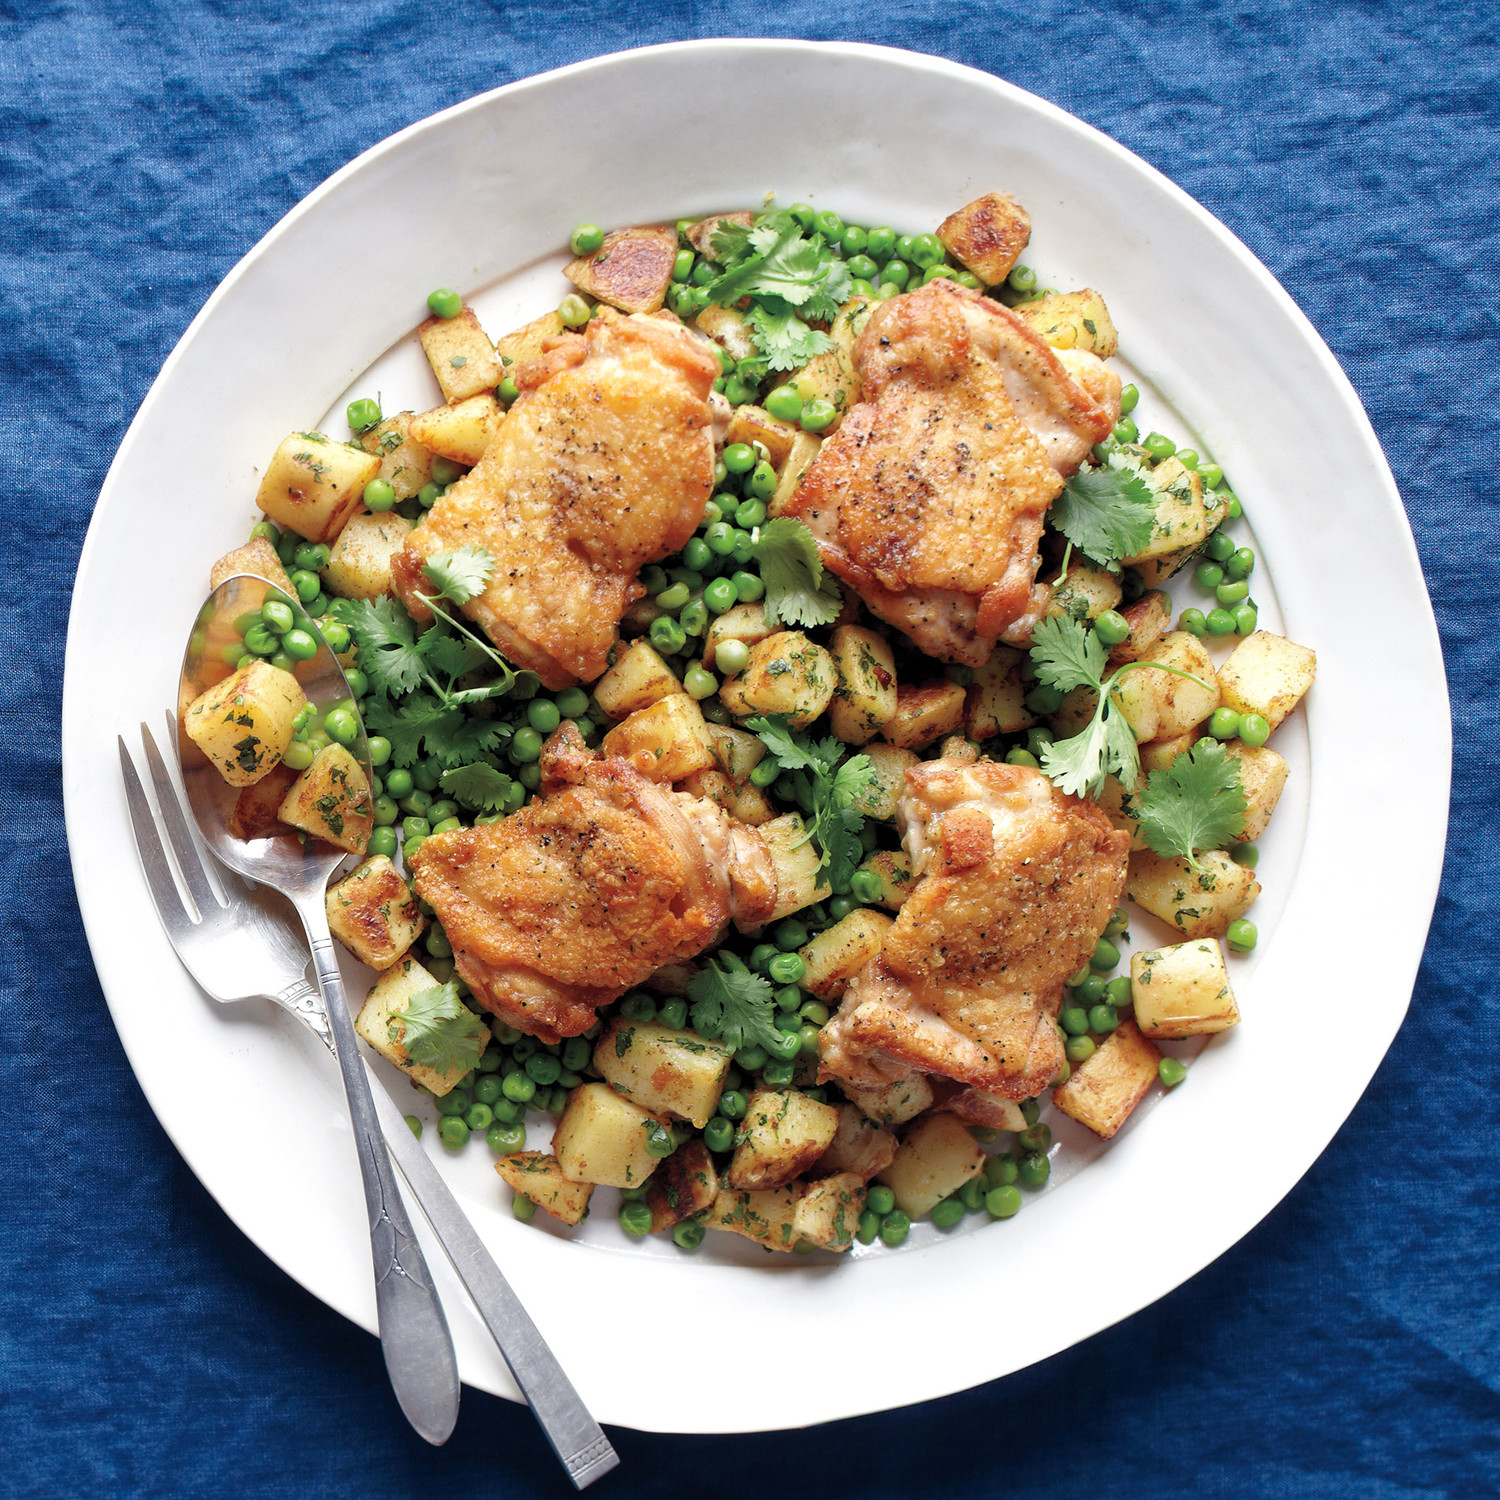 Spicy Potatoes and Peas with Chicken